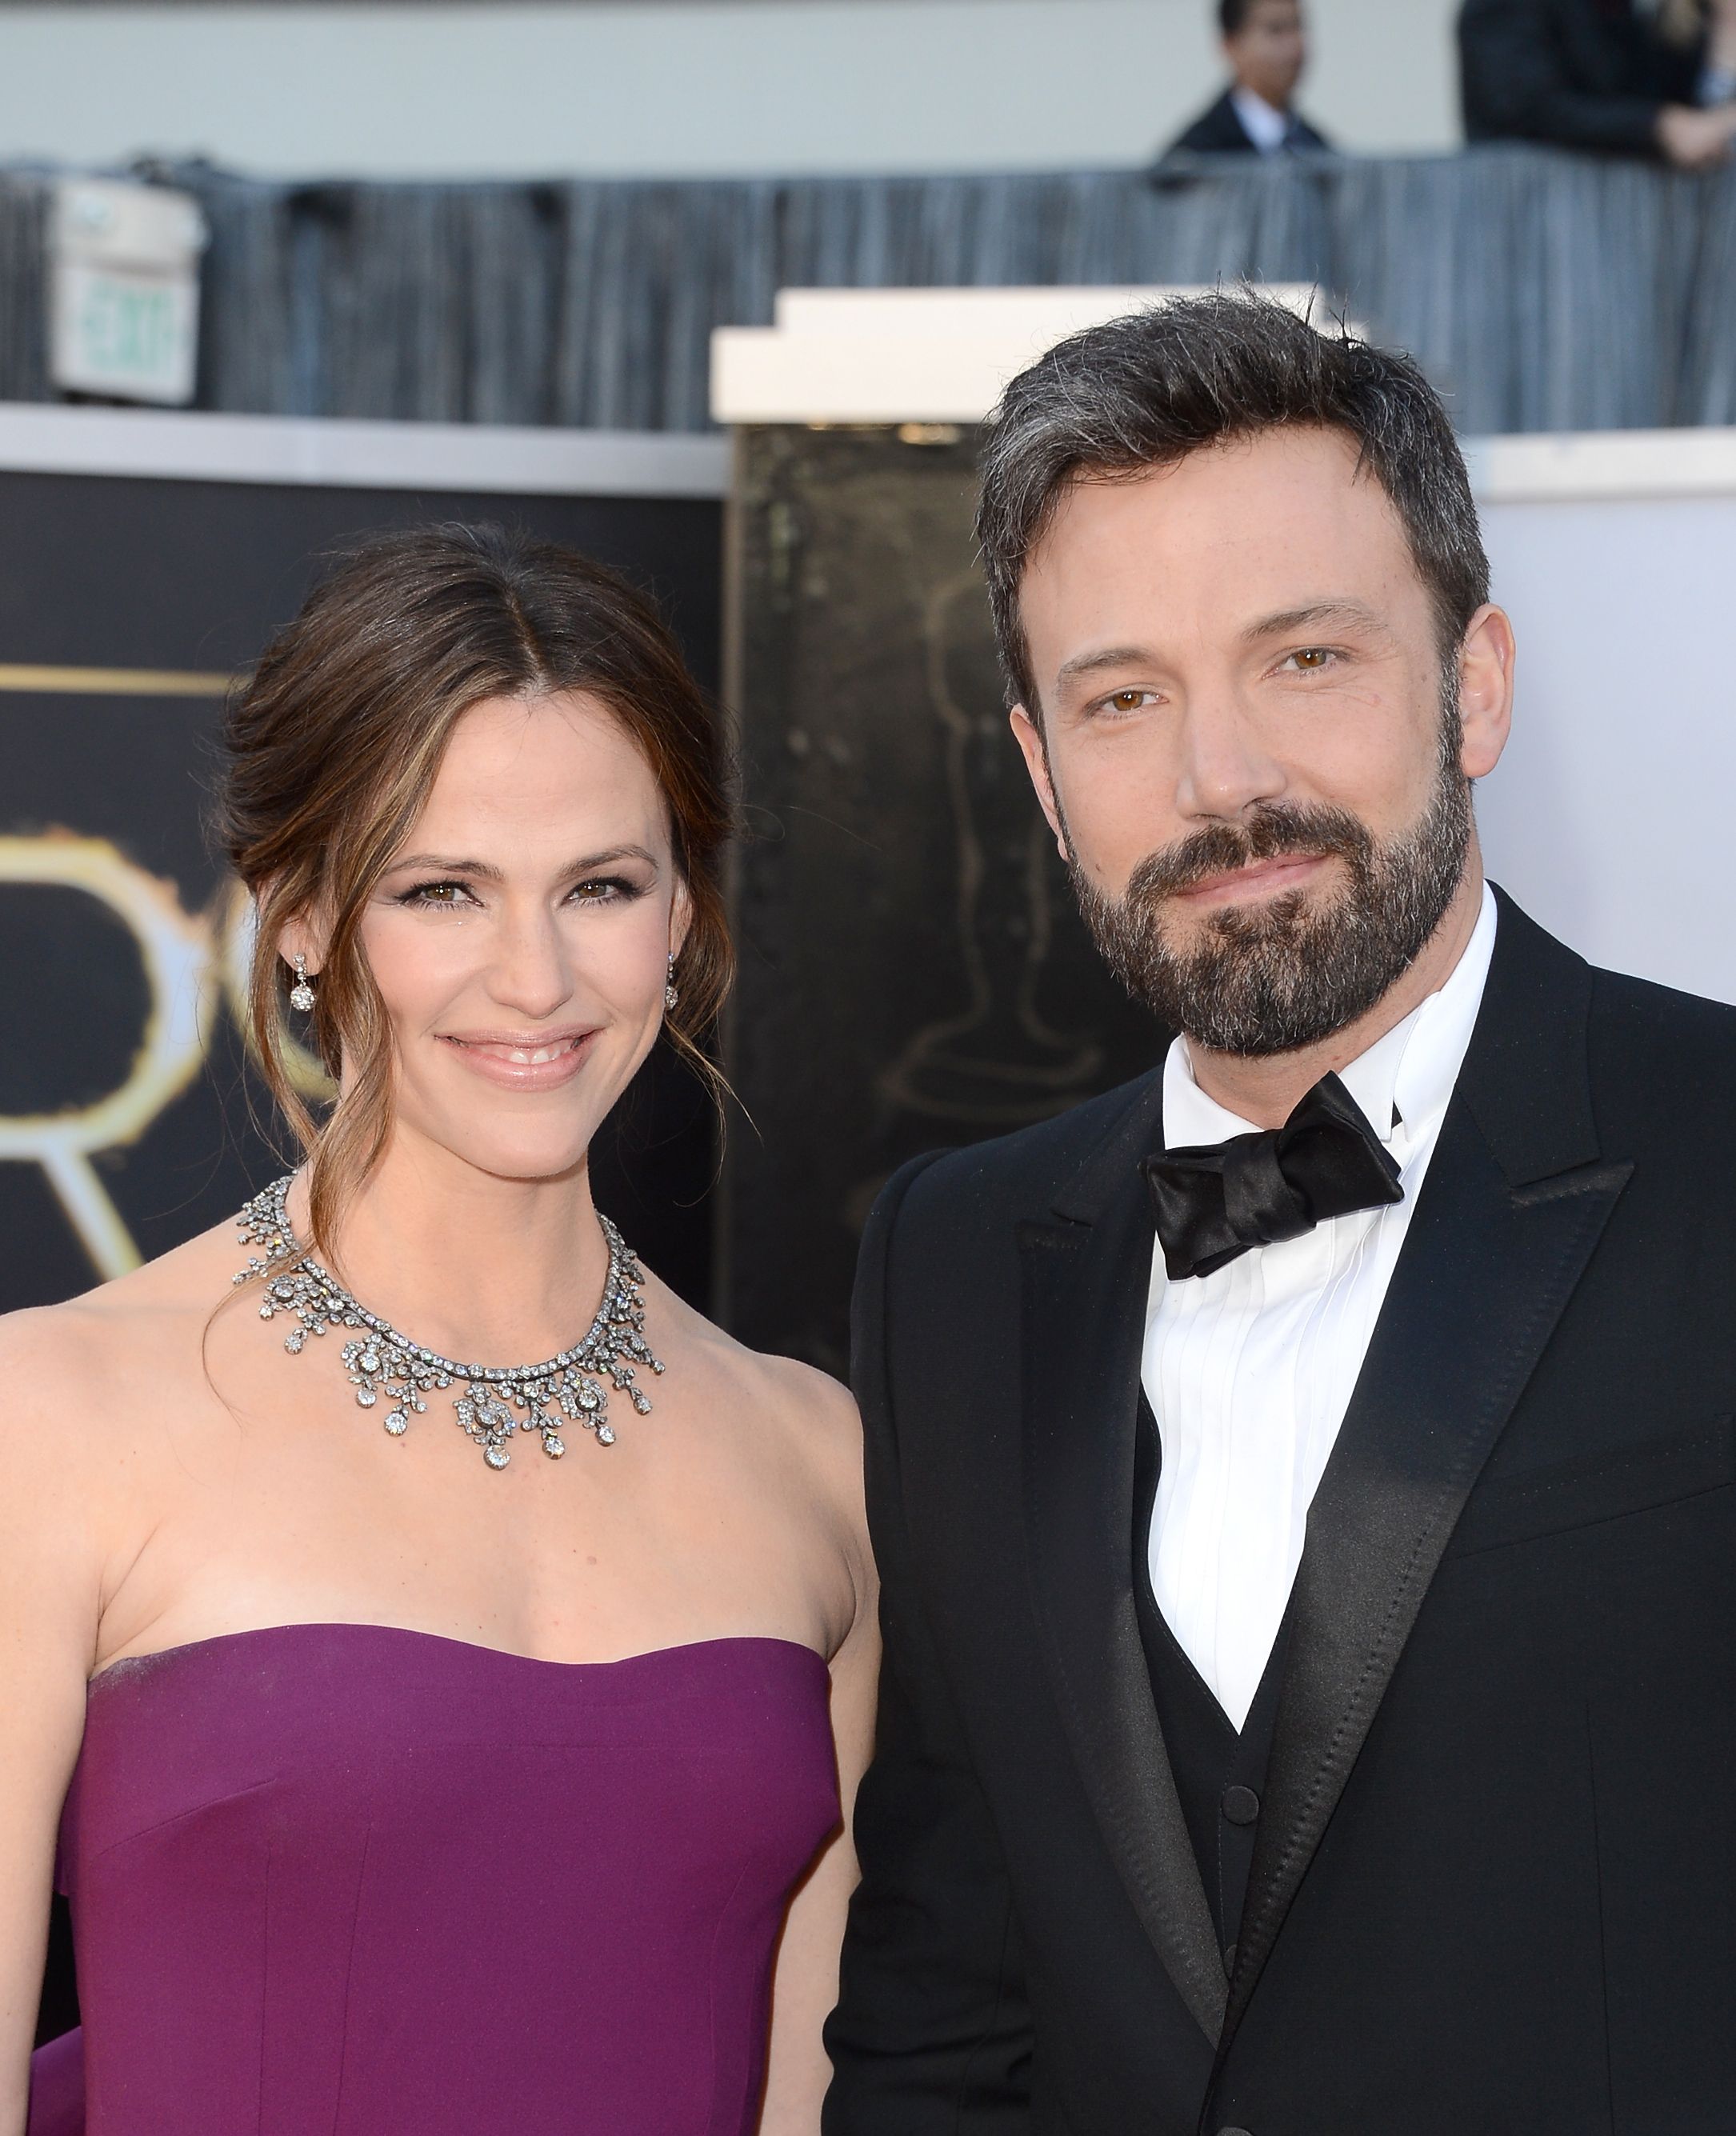 Jennifer Garner and Ben Affleck arrive at the Oscars at Hollywood & Highland Center on February 24, 2013 in Hollywood, California. | Source: Getty Images